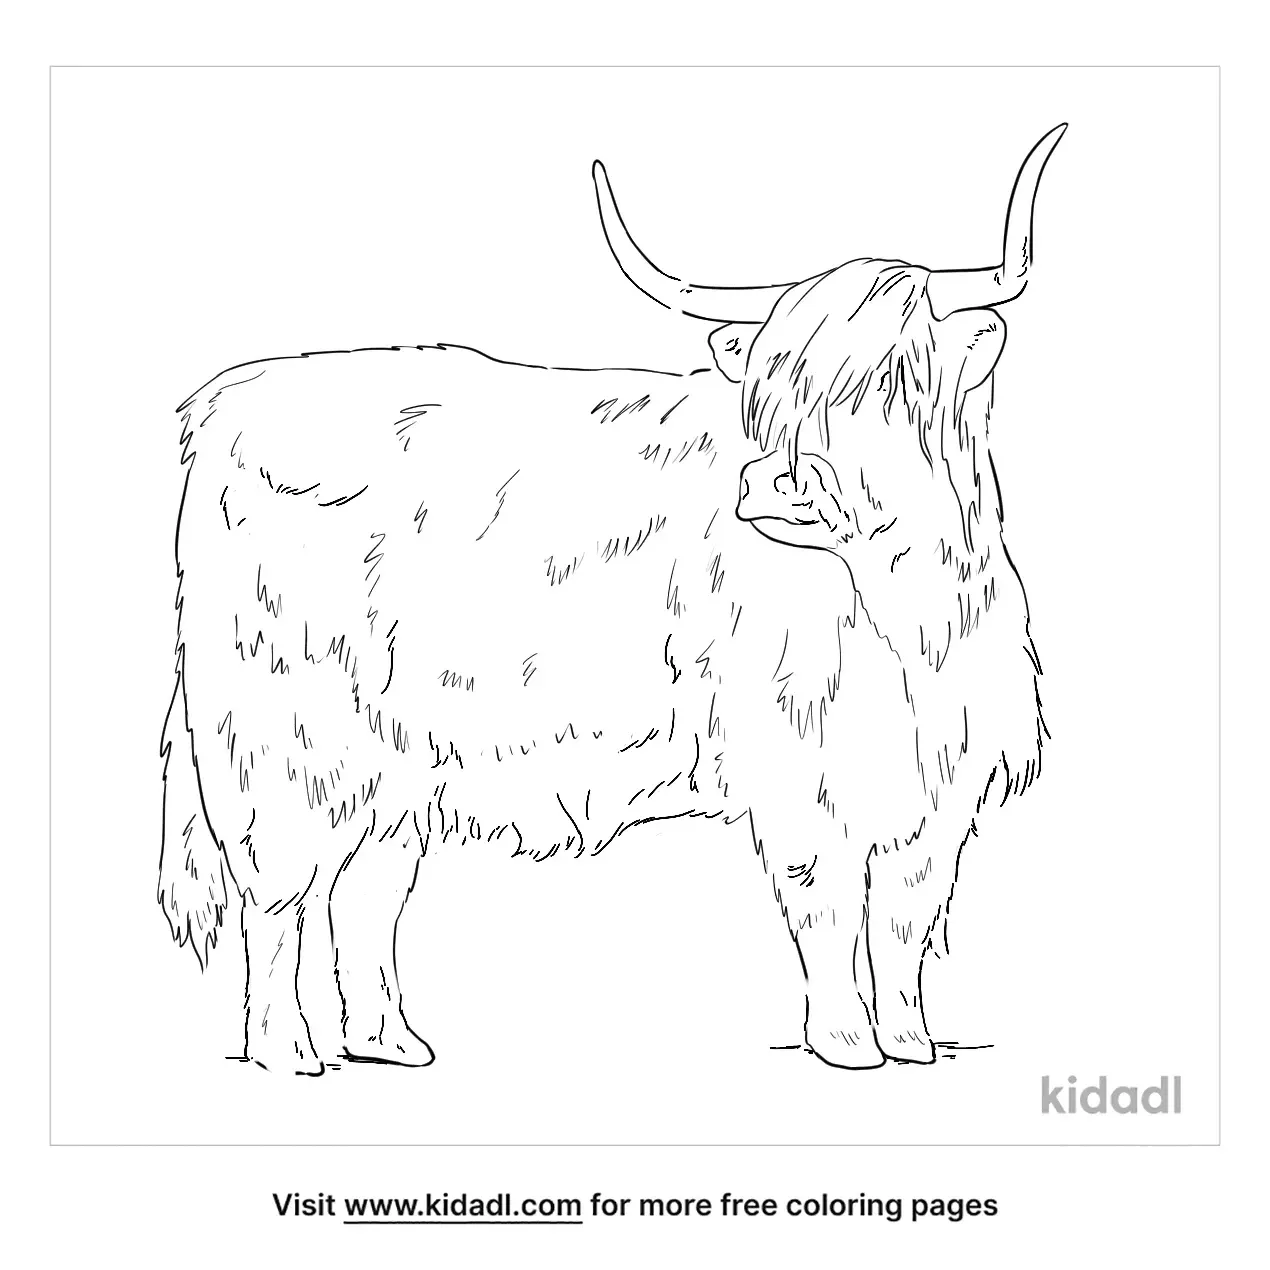 Free Highland Cattle Coloring Page | Coloring Page Printables | Kidadl